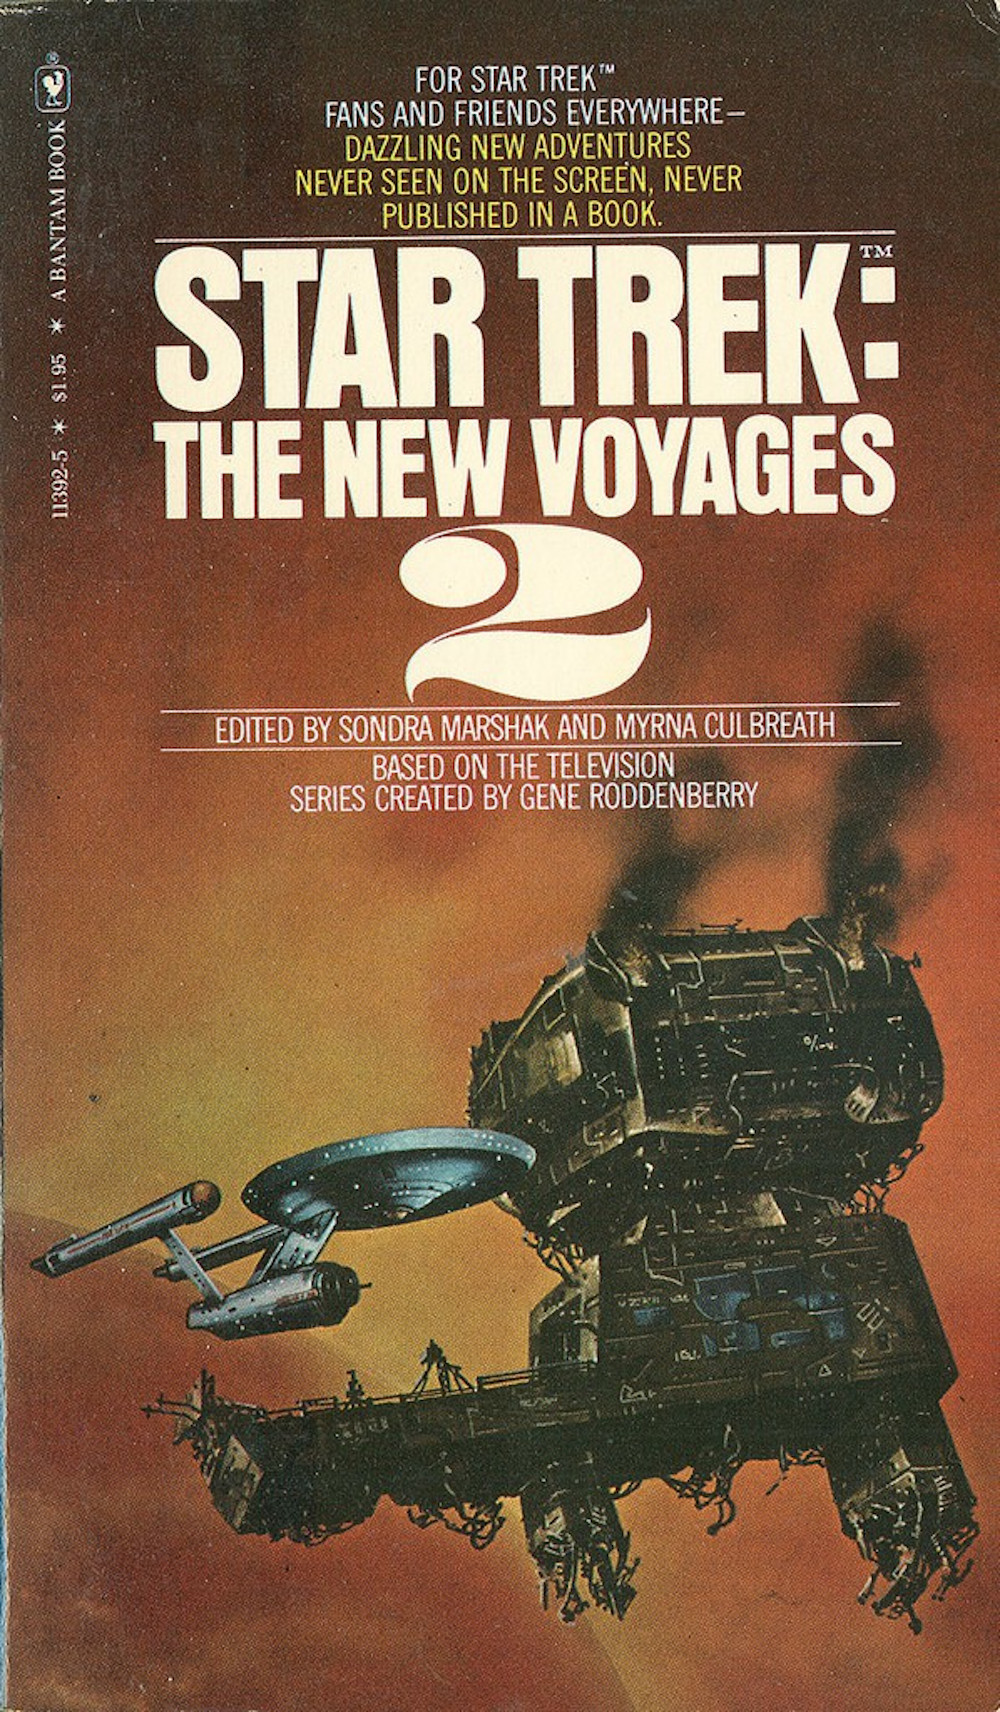 "The New Voyages 2"